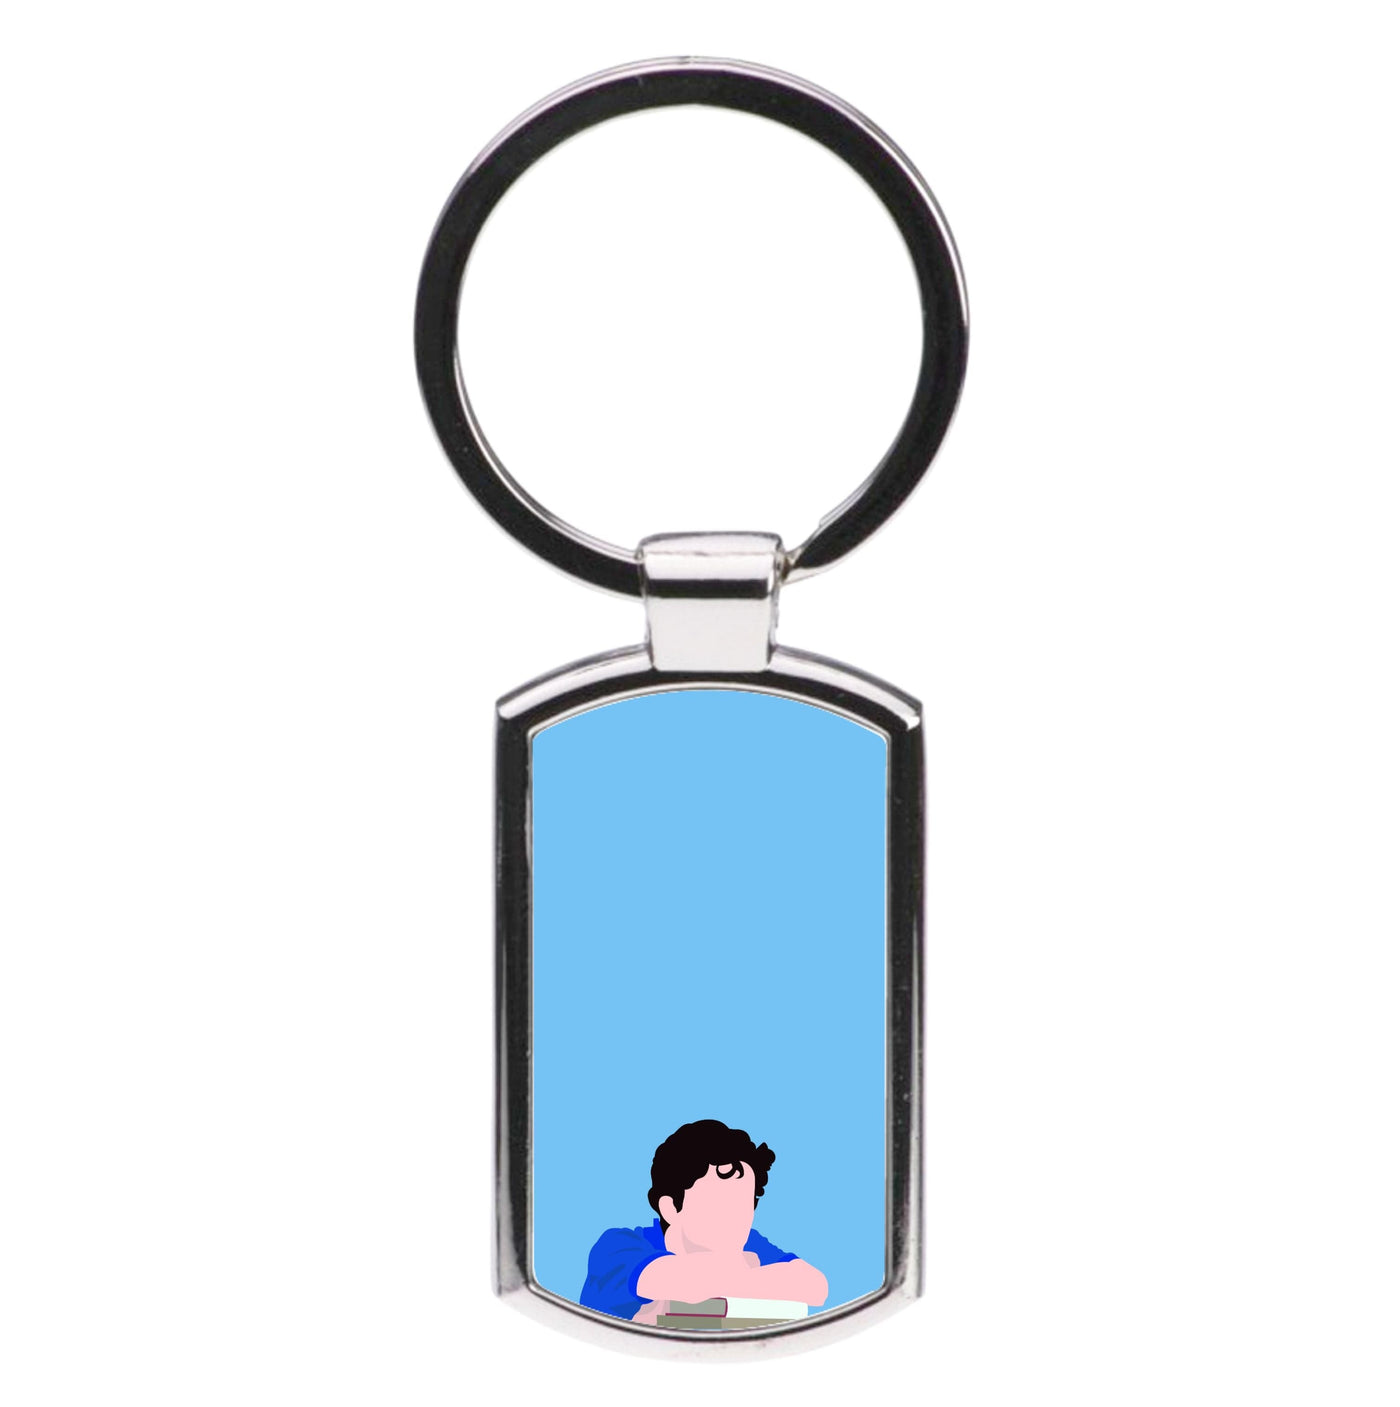 Call Me By Your Name - Timothée Chalamet Luxury Keyring